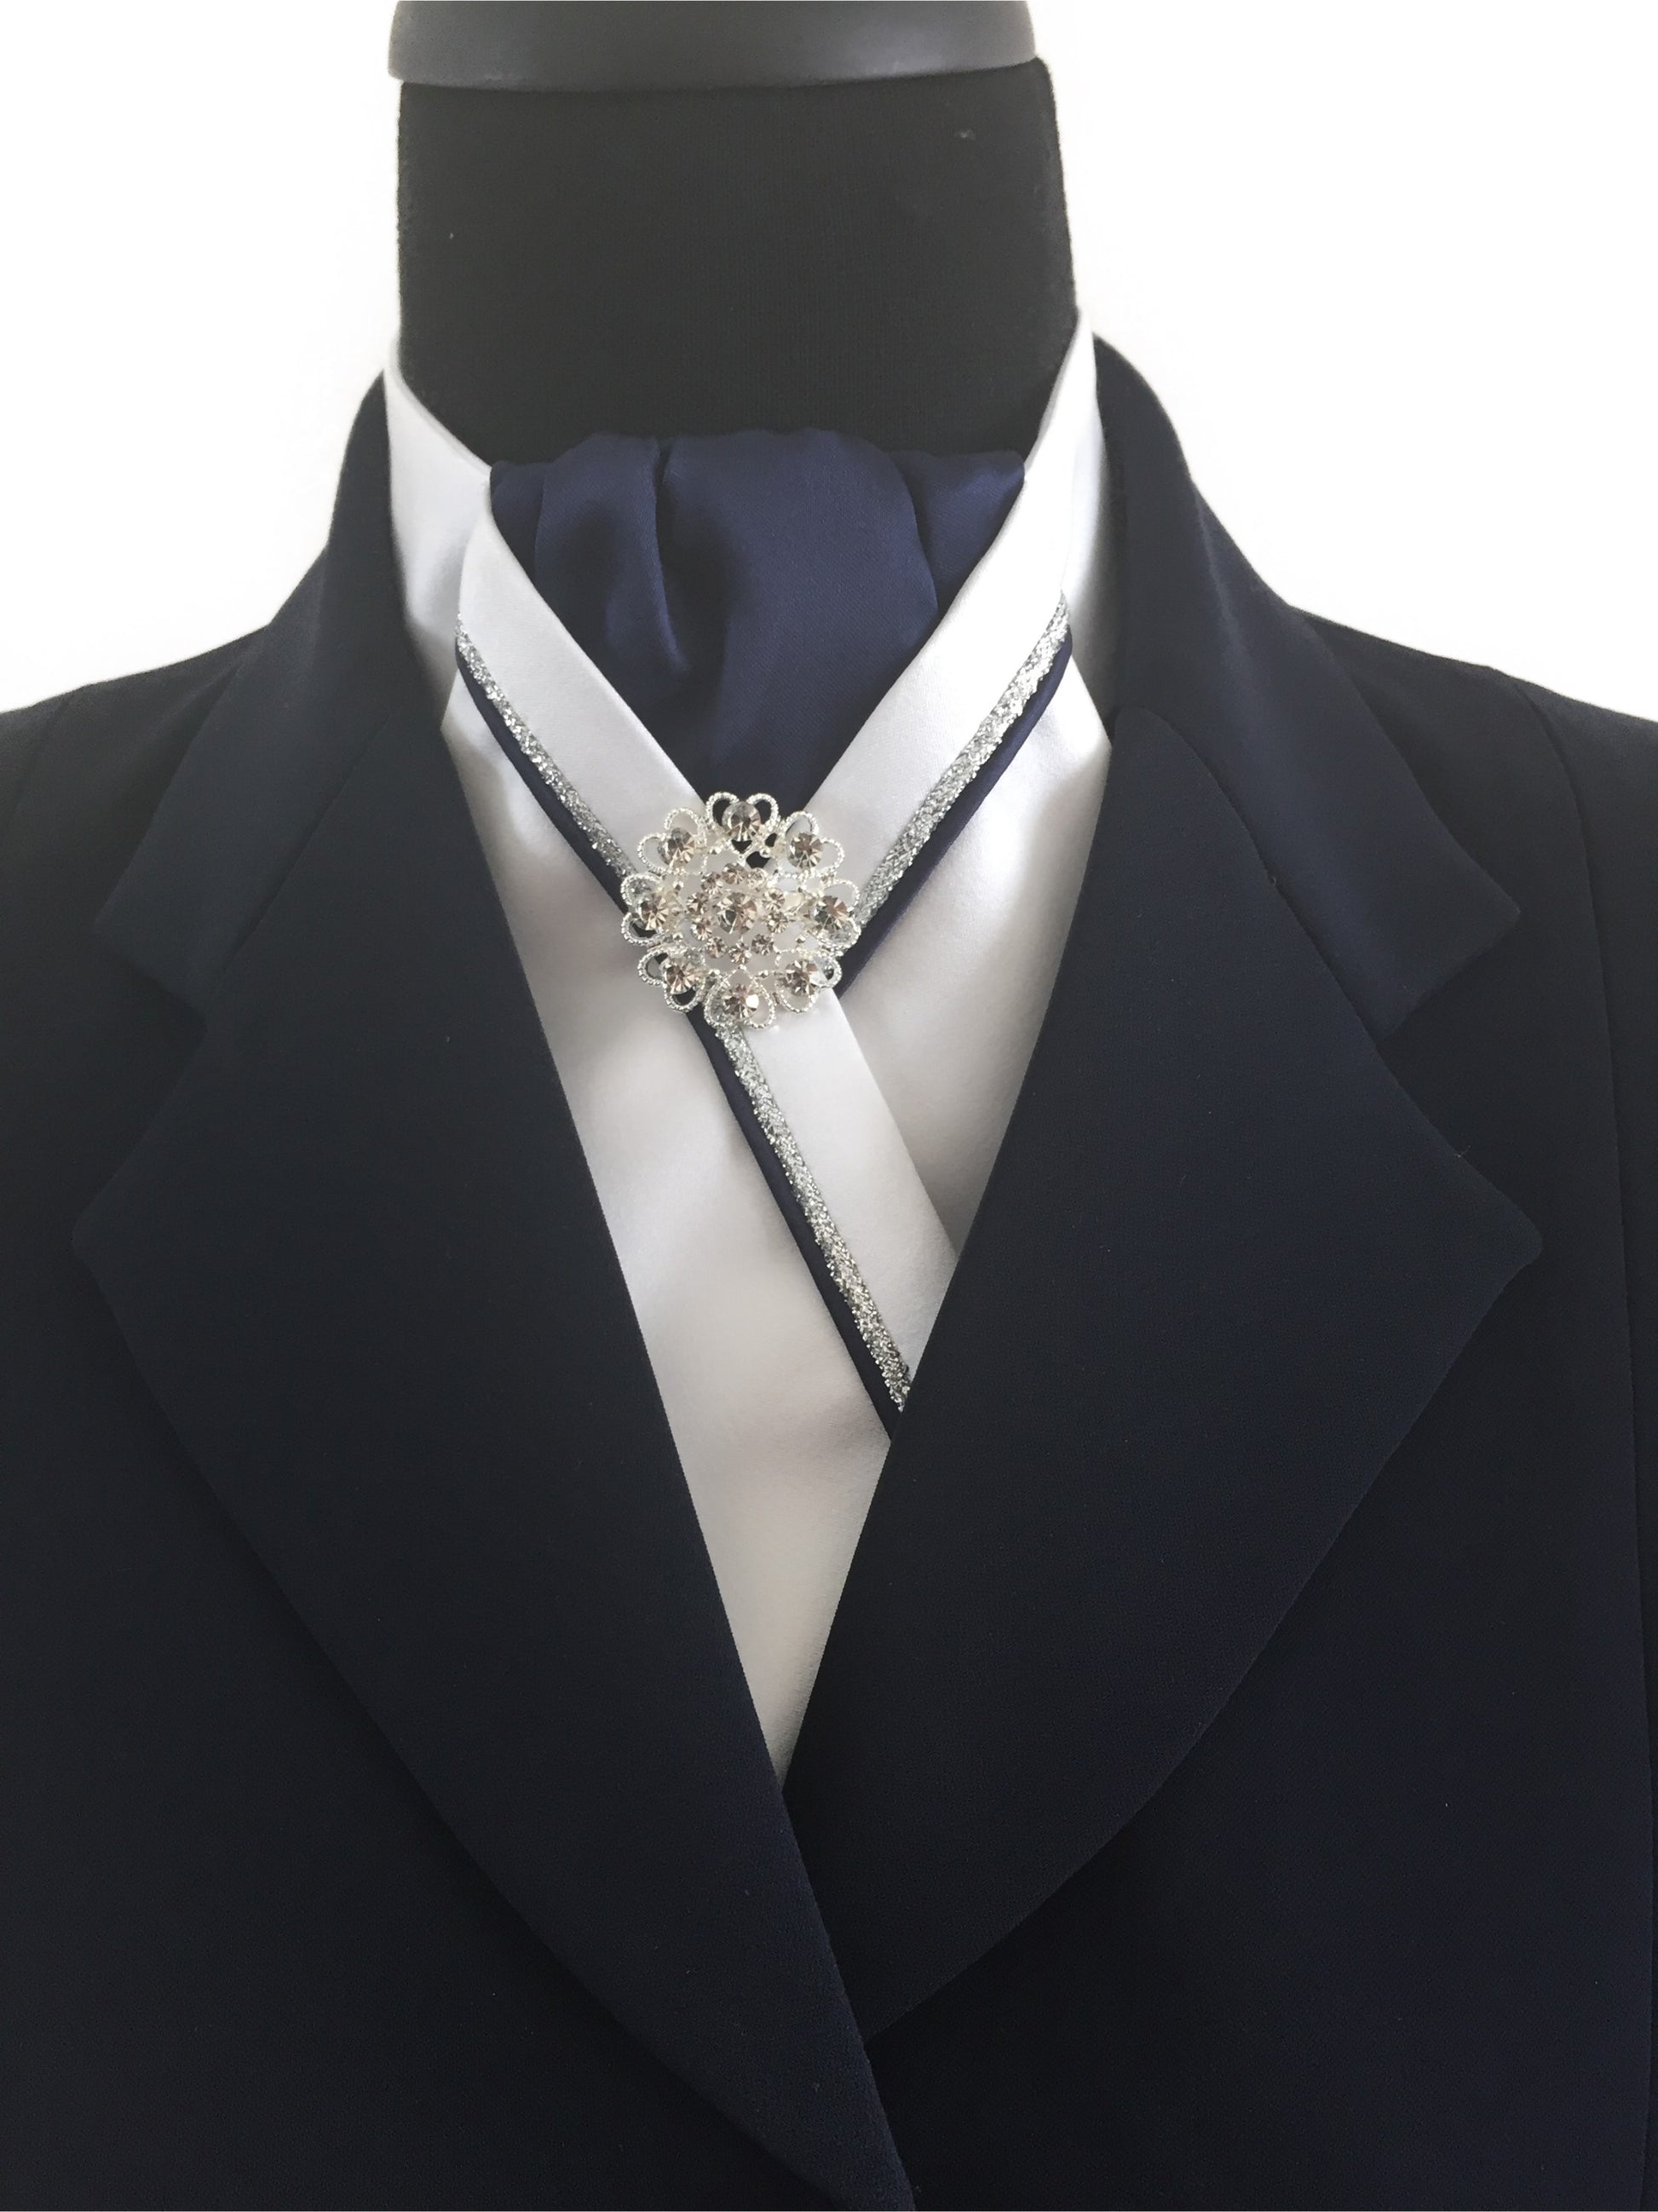 White Stock Tie with Navy Center and Navy & Silver Piping